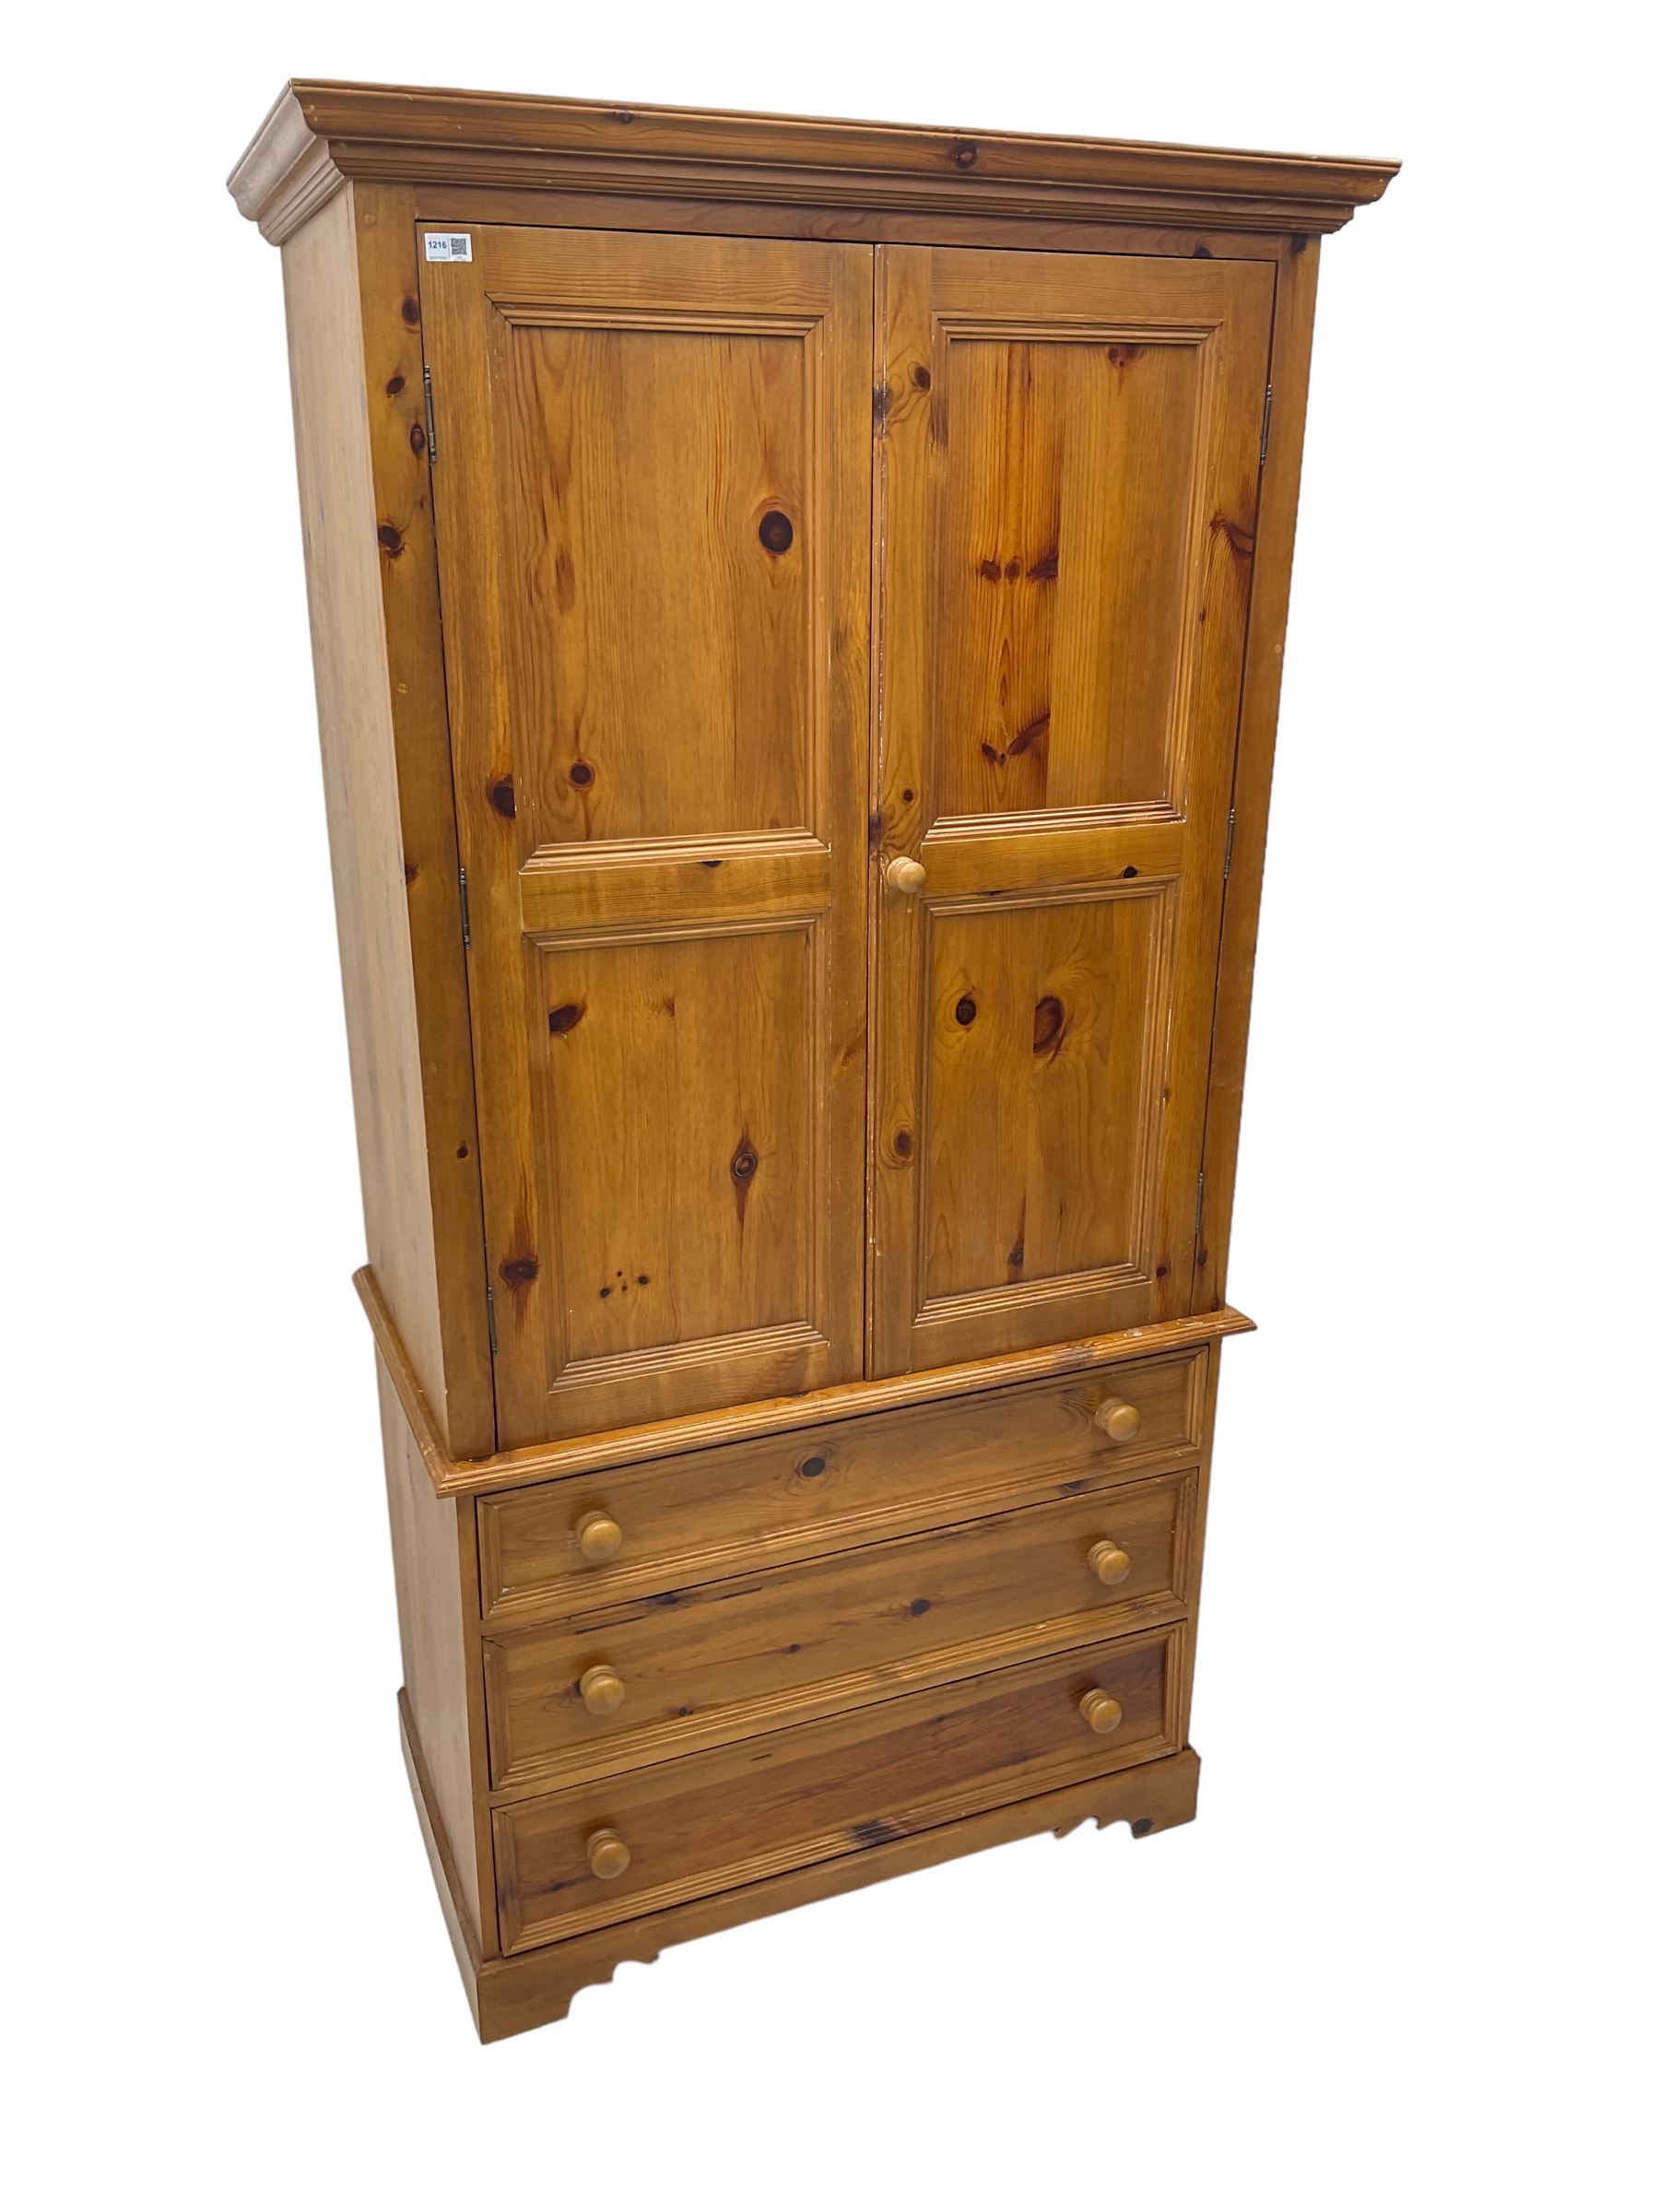 Solid waxed pine double wardrobe - Image 8 of 8